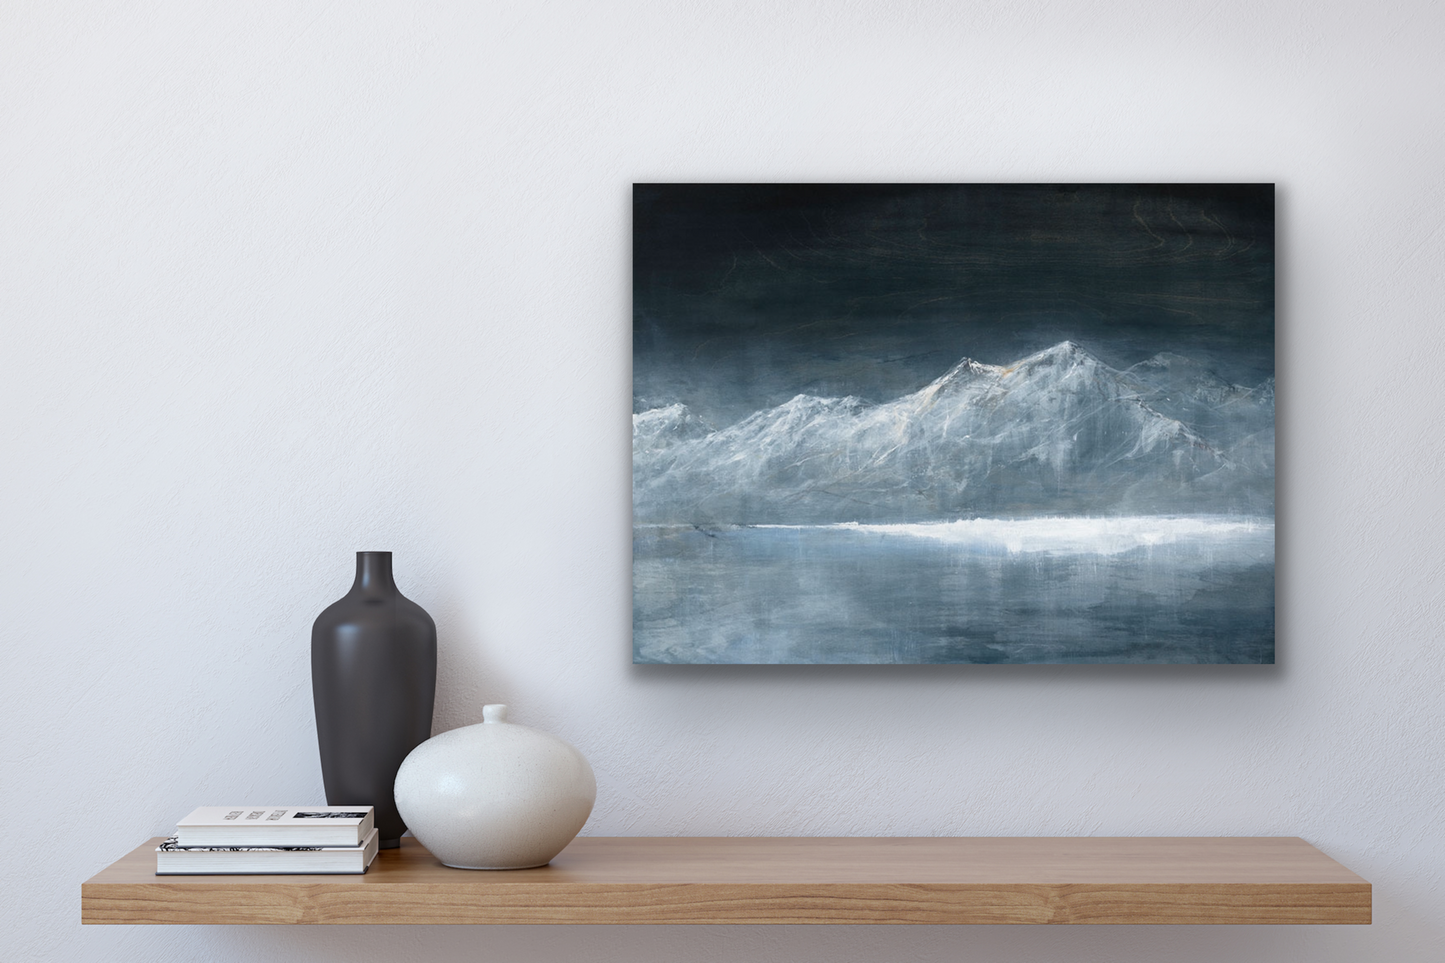 The Secret Place by Canadian artist Colette Tan will look amazing in your hallway, dining room or living room.  This wall art piece deserves a prominent spot to share its natural beauty.